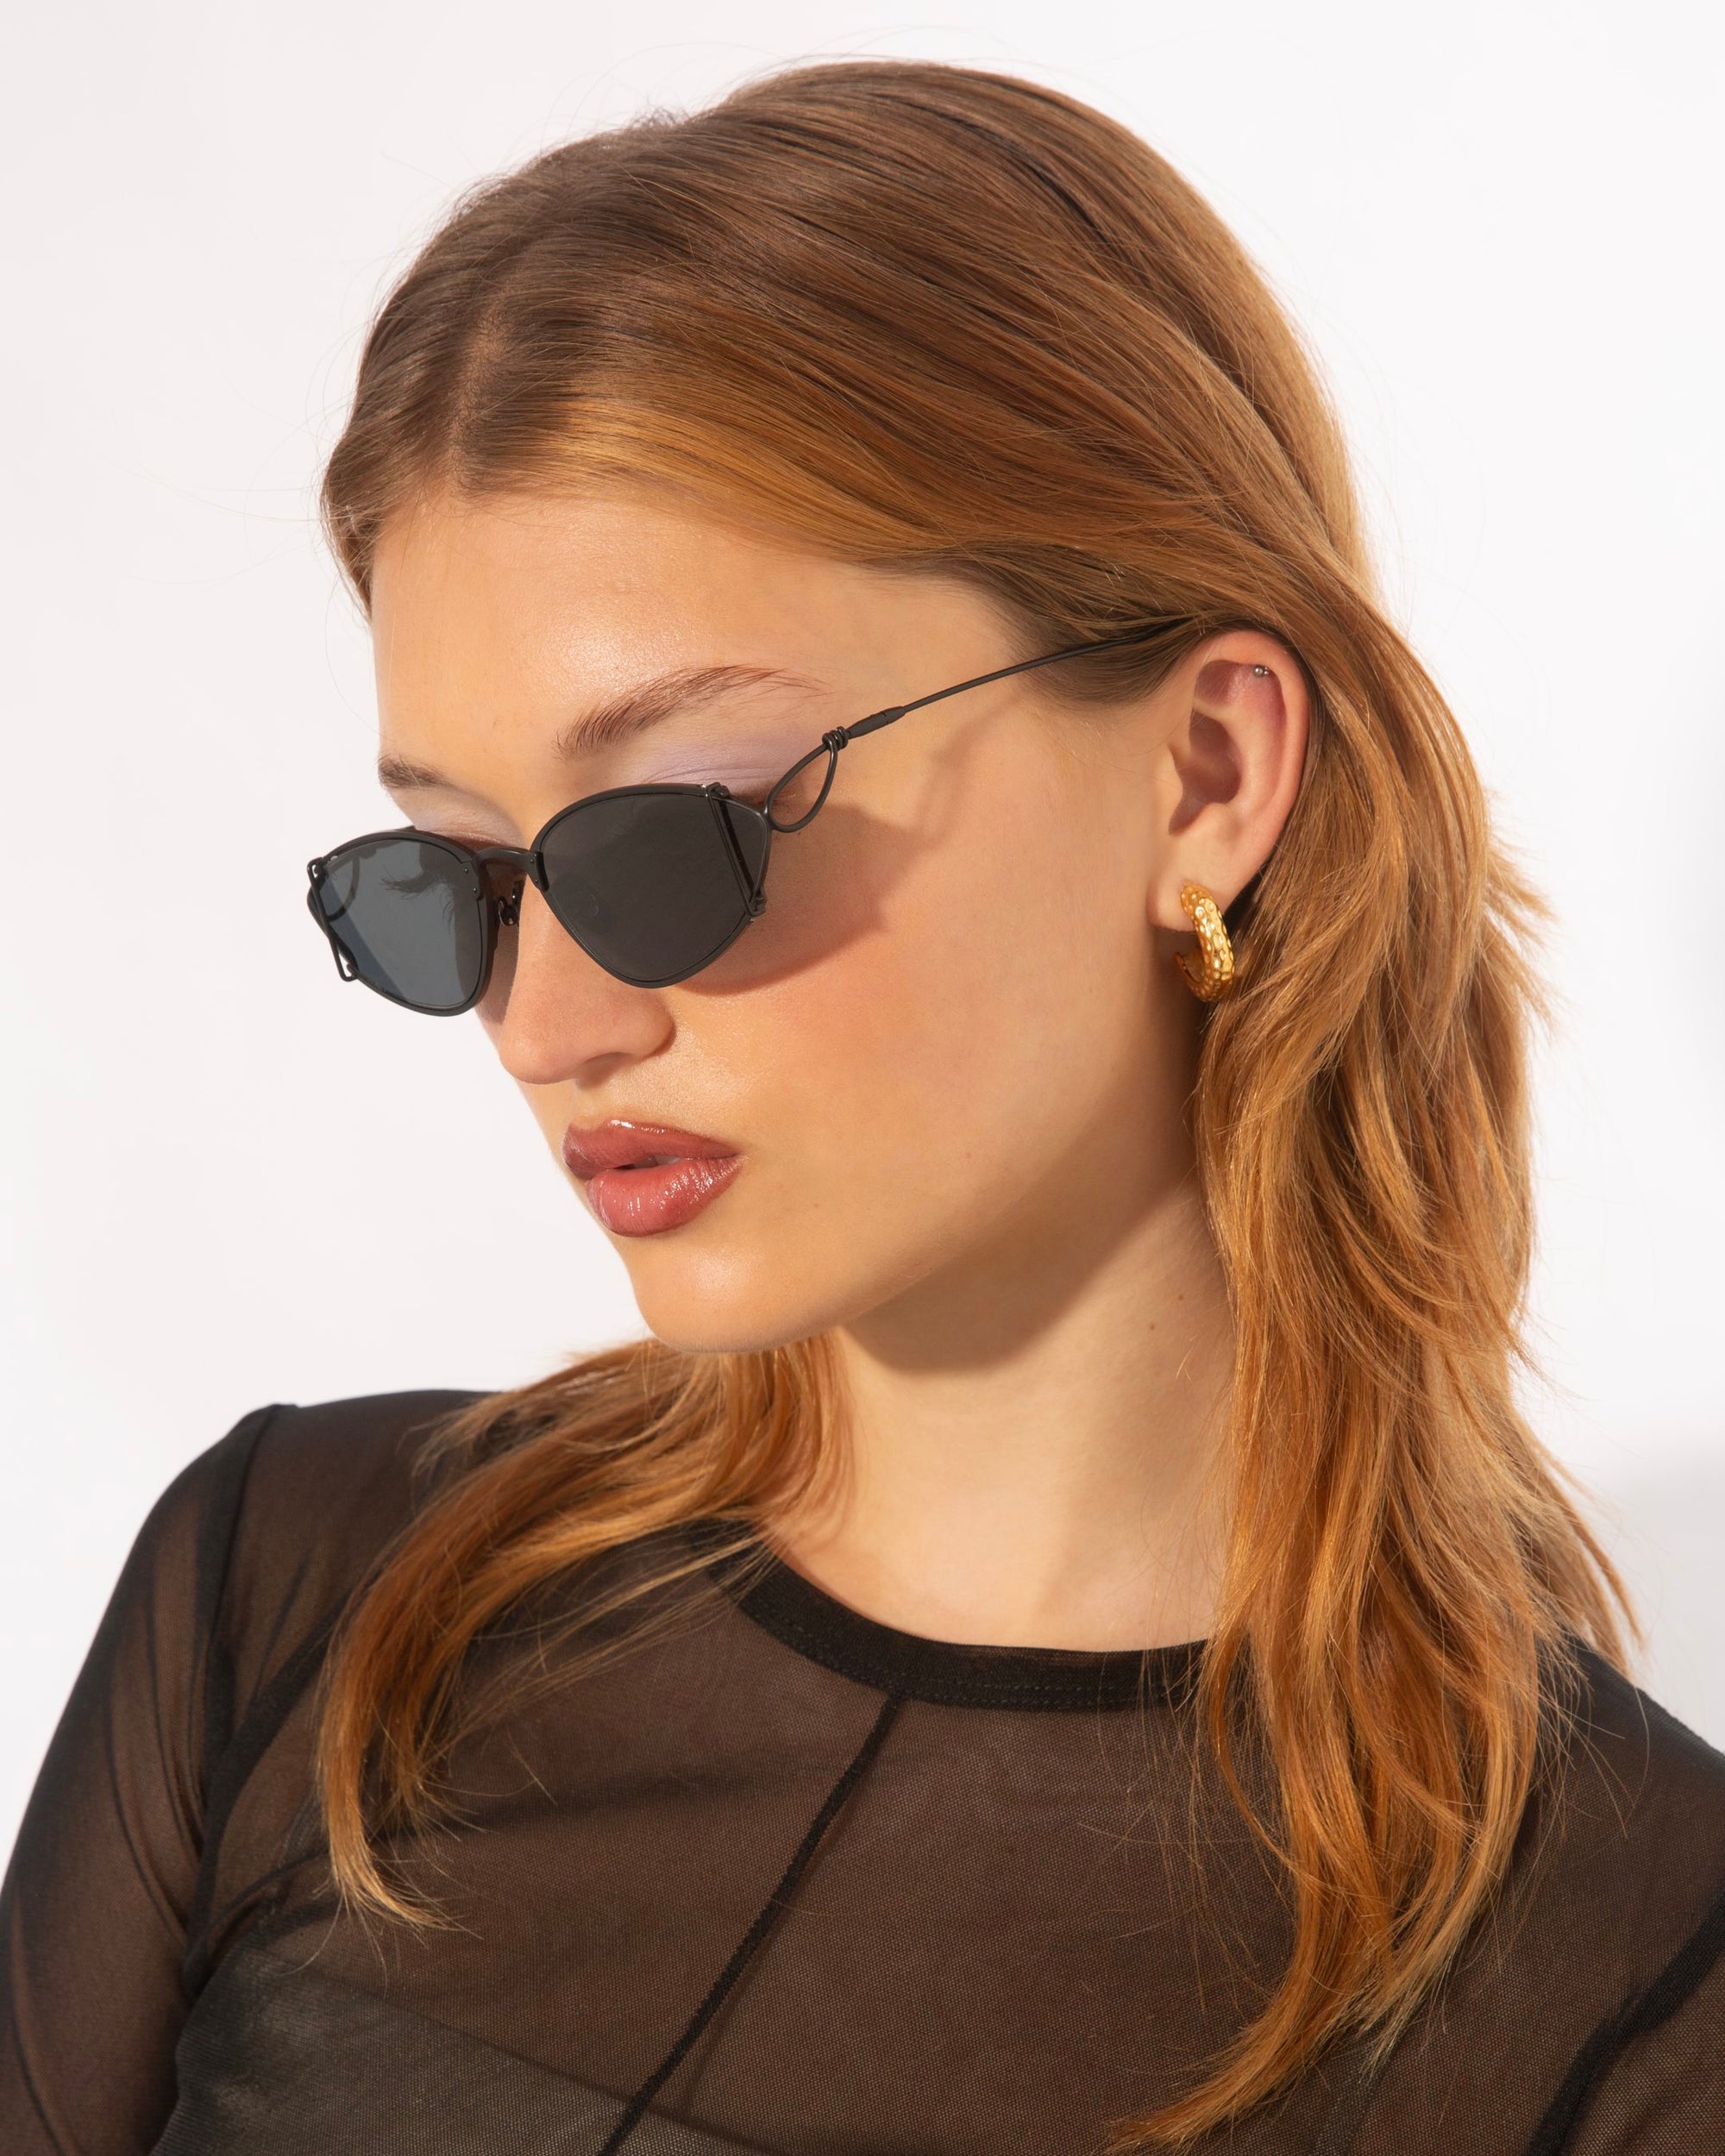 A person with light skin, long auburn hair, and wearing For Art&#39;s Sake® Ornate sunglasses with ultra-lightweight nylon lenses is shown in profile against a plain background. They are dressed in a sheer black top and gold hoop earrings that shimmer like 18-karat gold-plated jewelry.